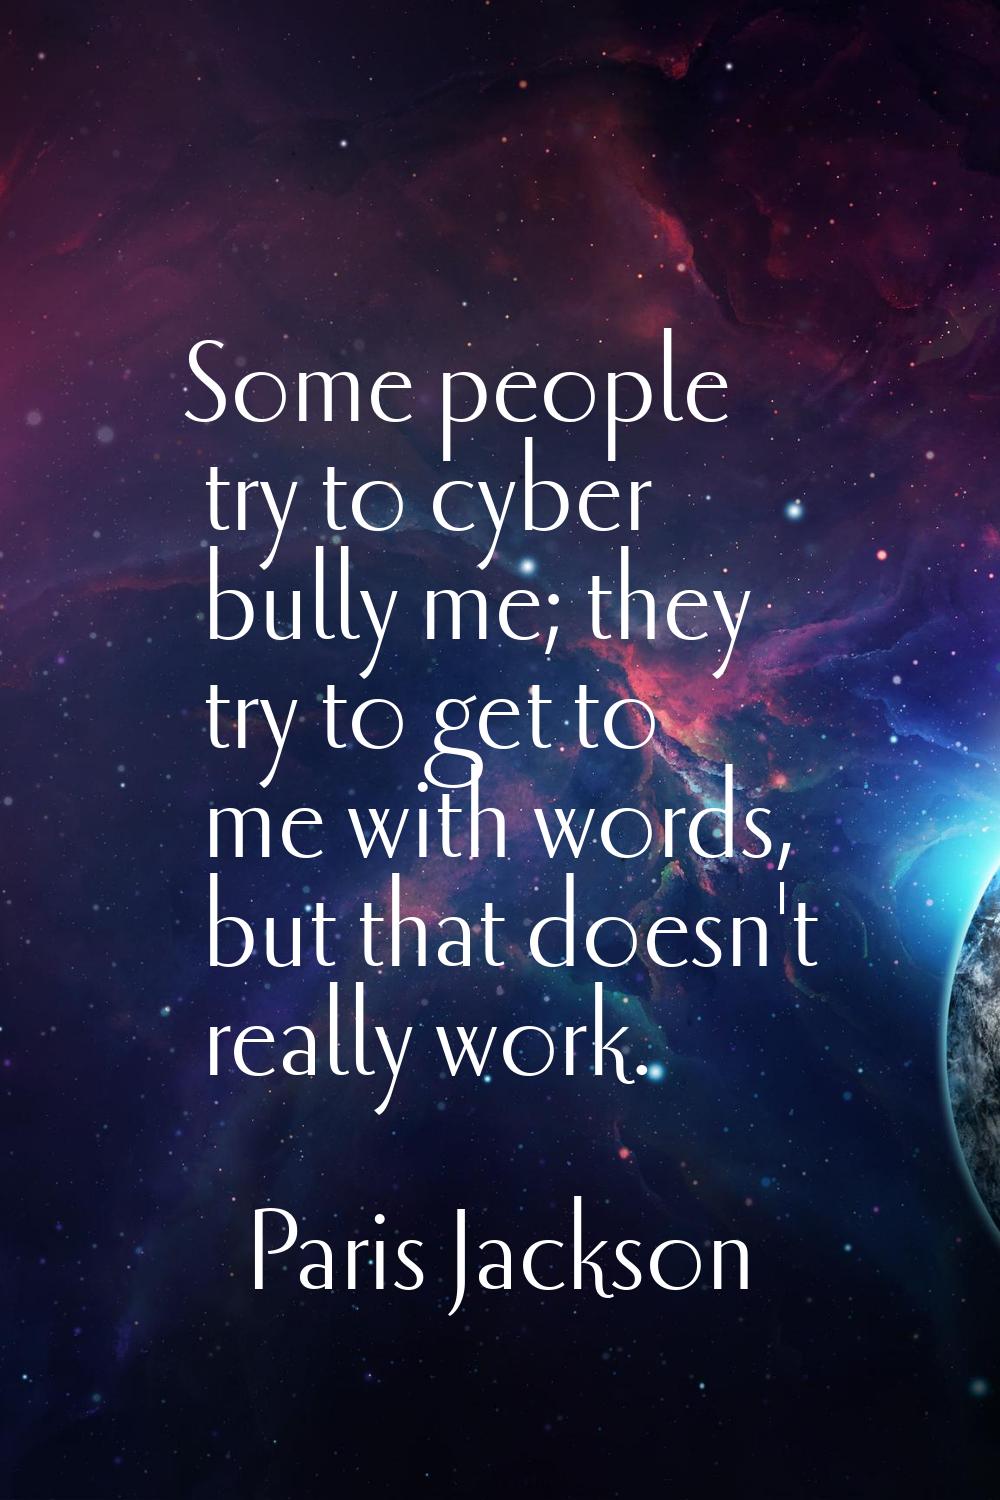 Some people try to cyber bully me; they try to get to me with words, but that doesn't really work.